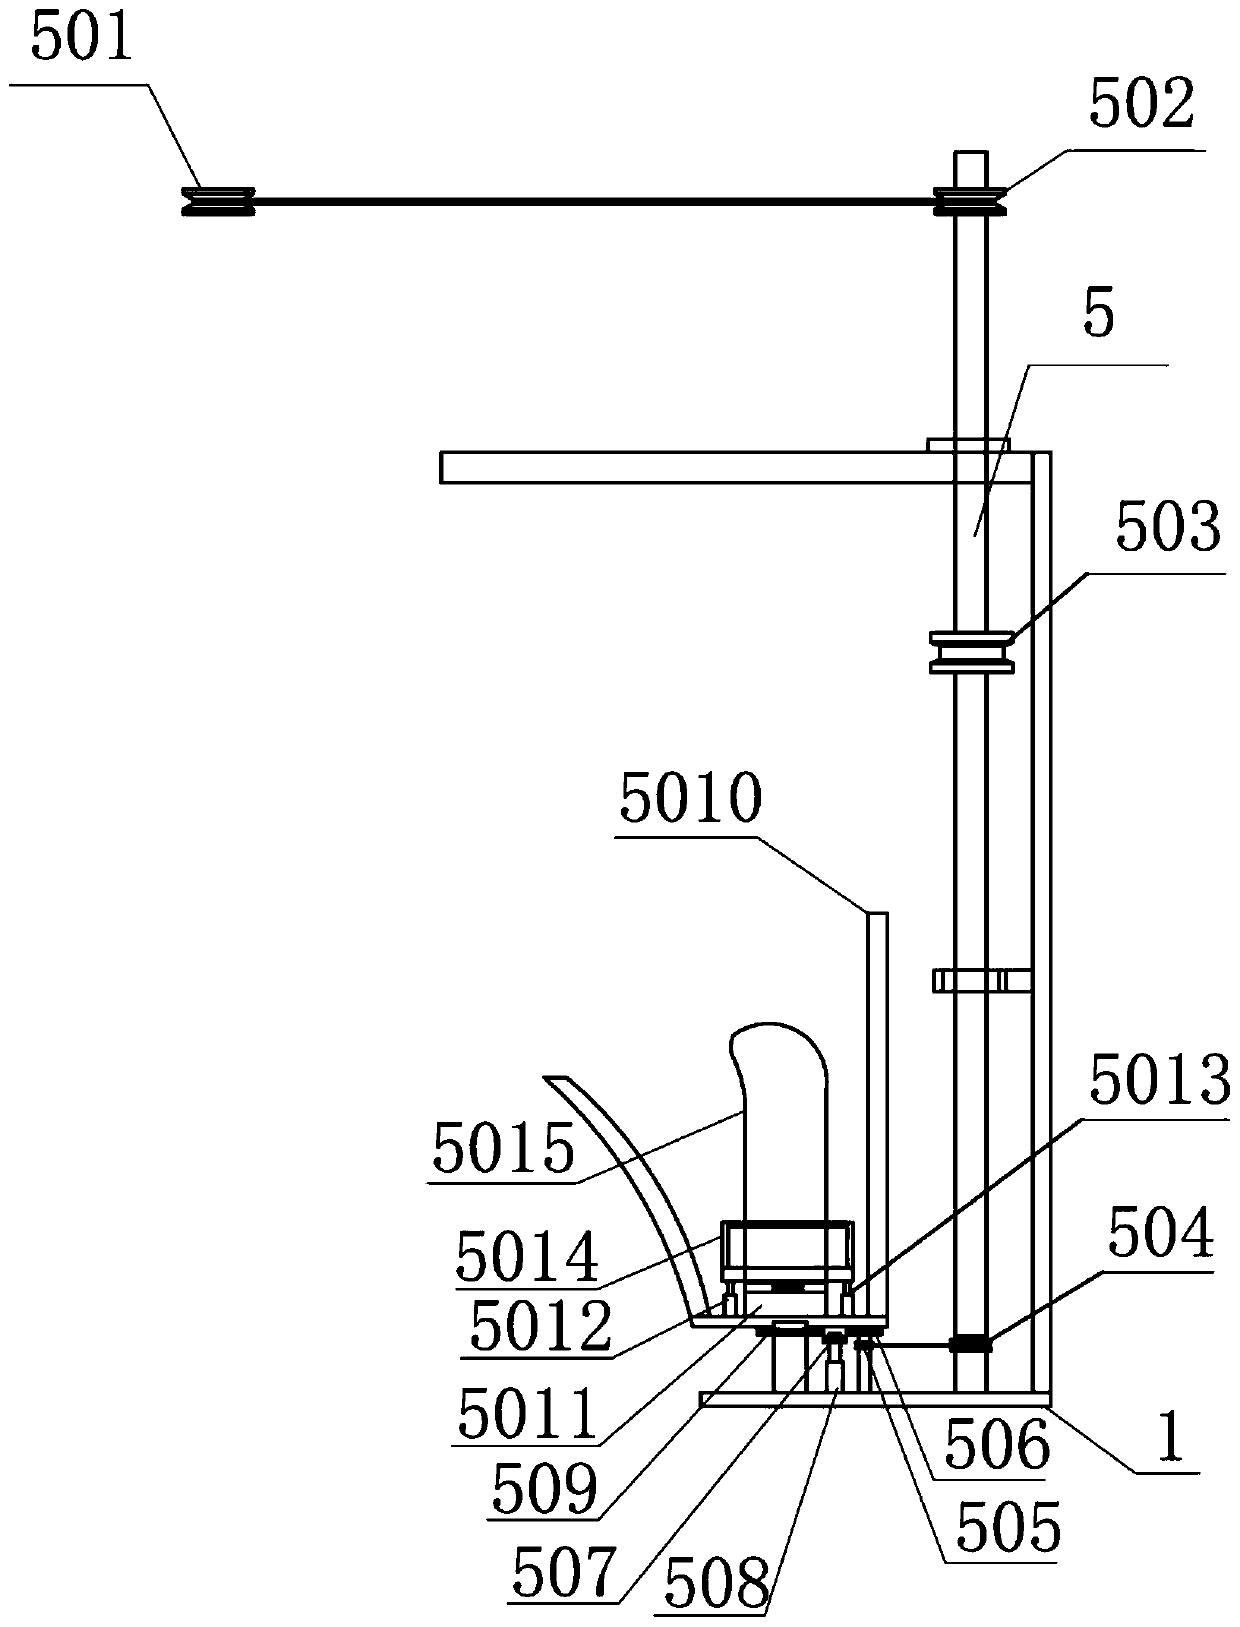 Inclined-type extrusion internal-formation device for plastic corrugated pipe